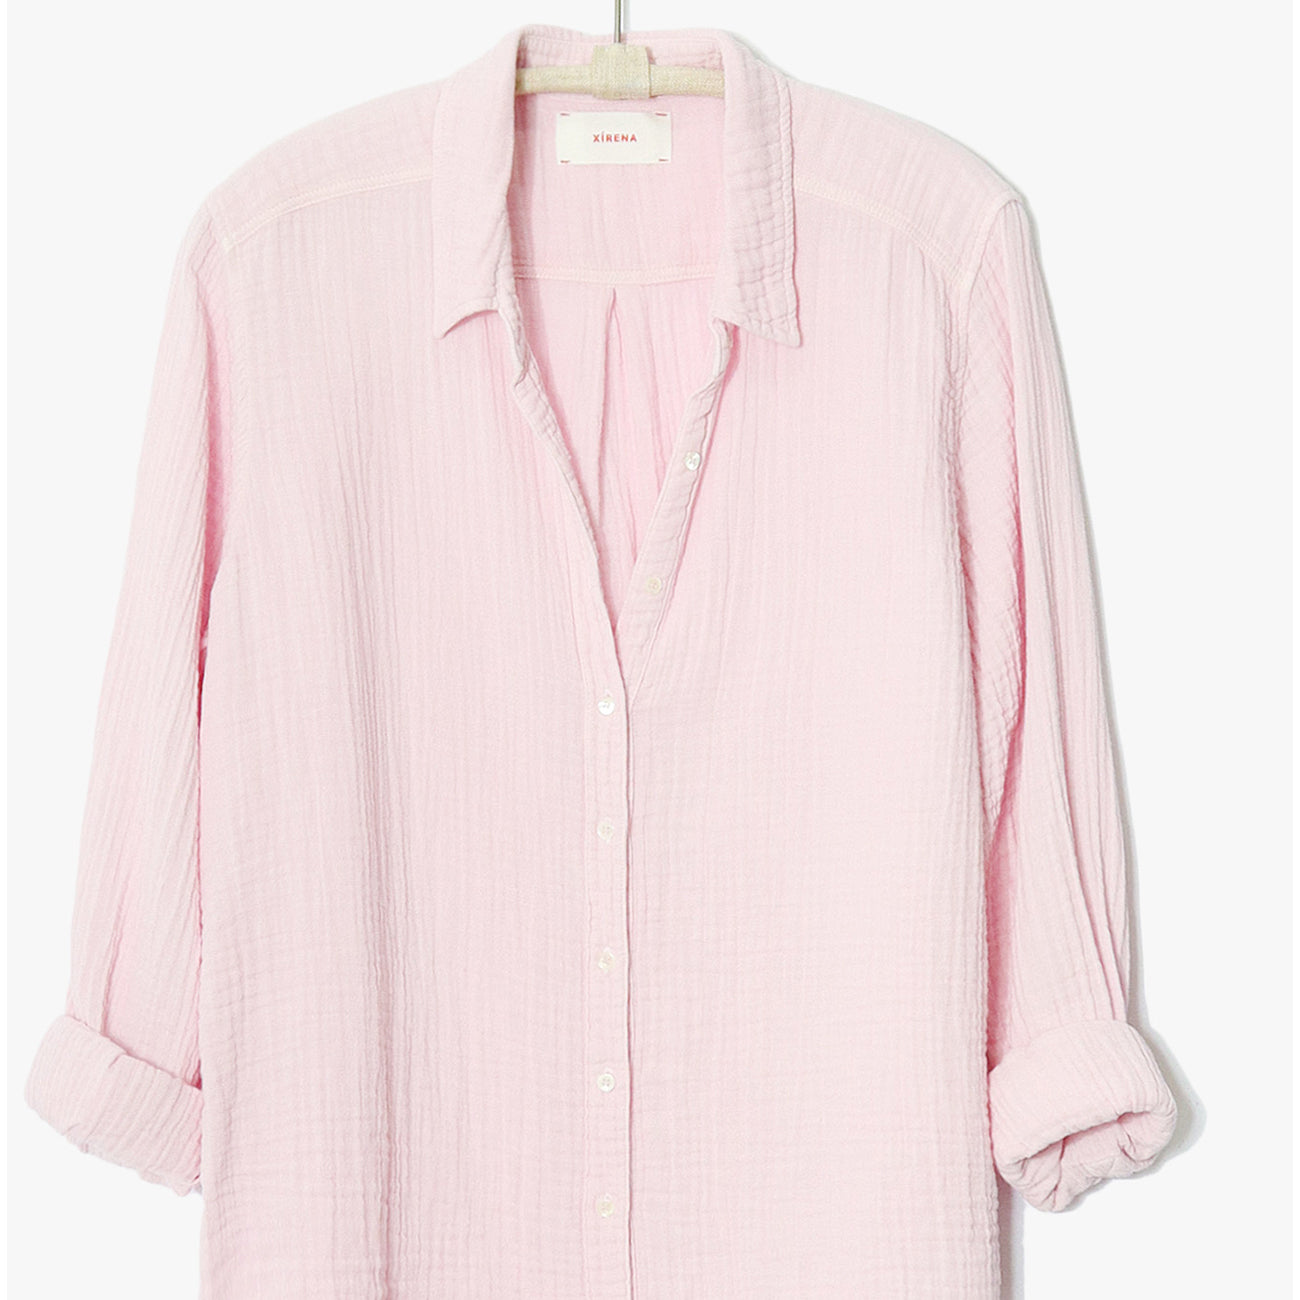 scout shirt in soft pink